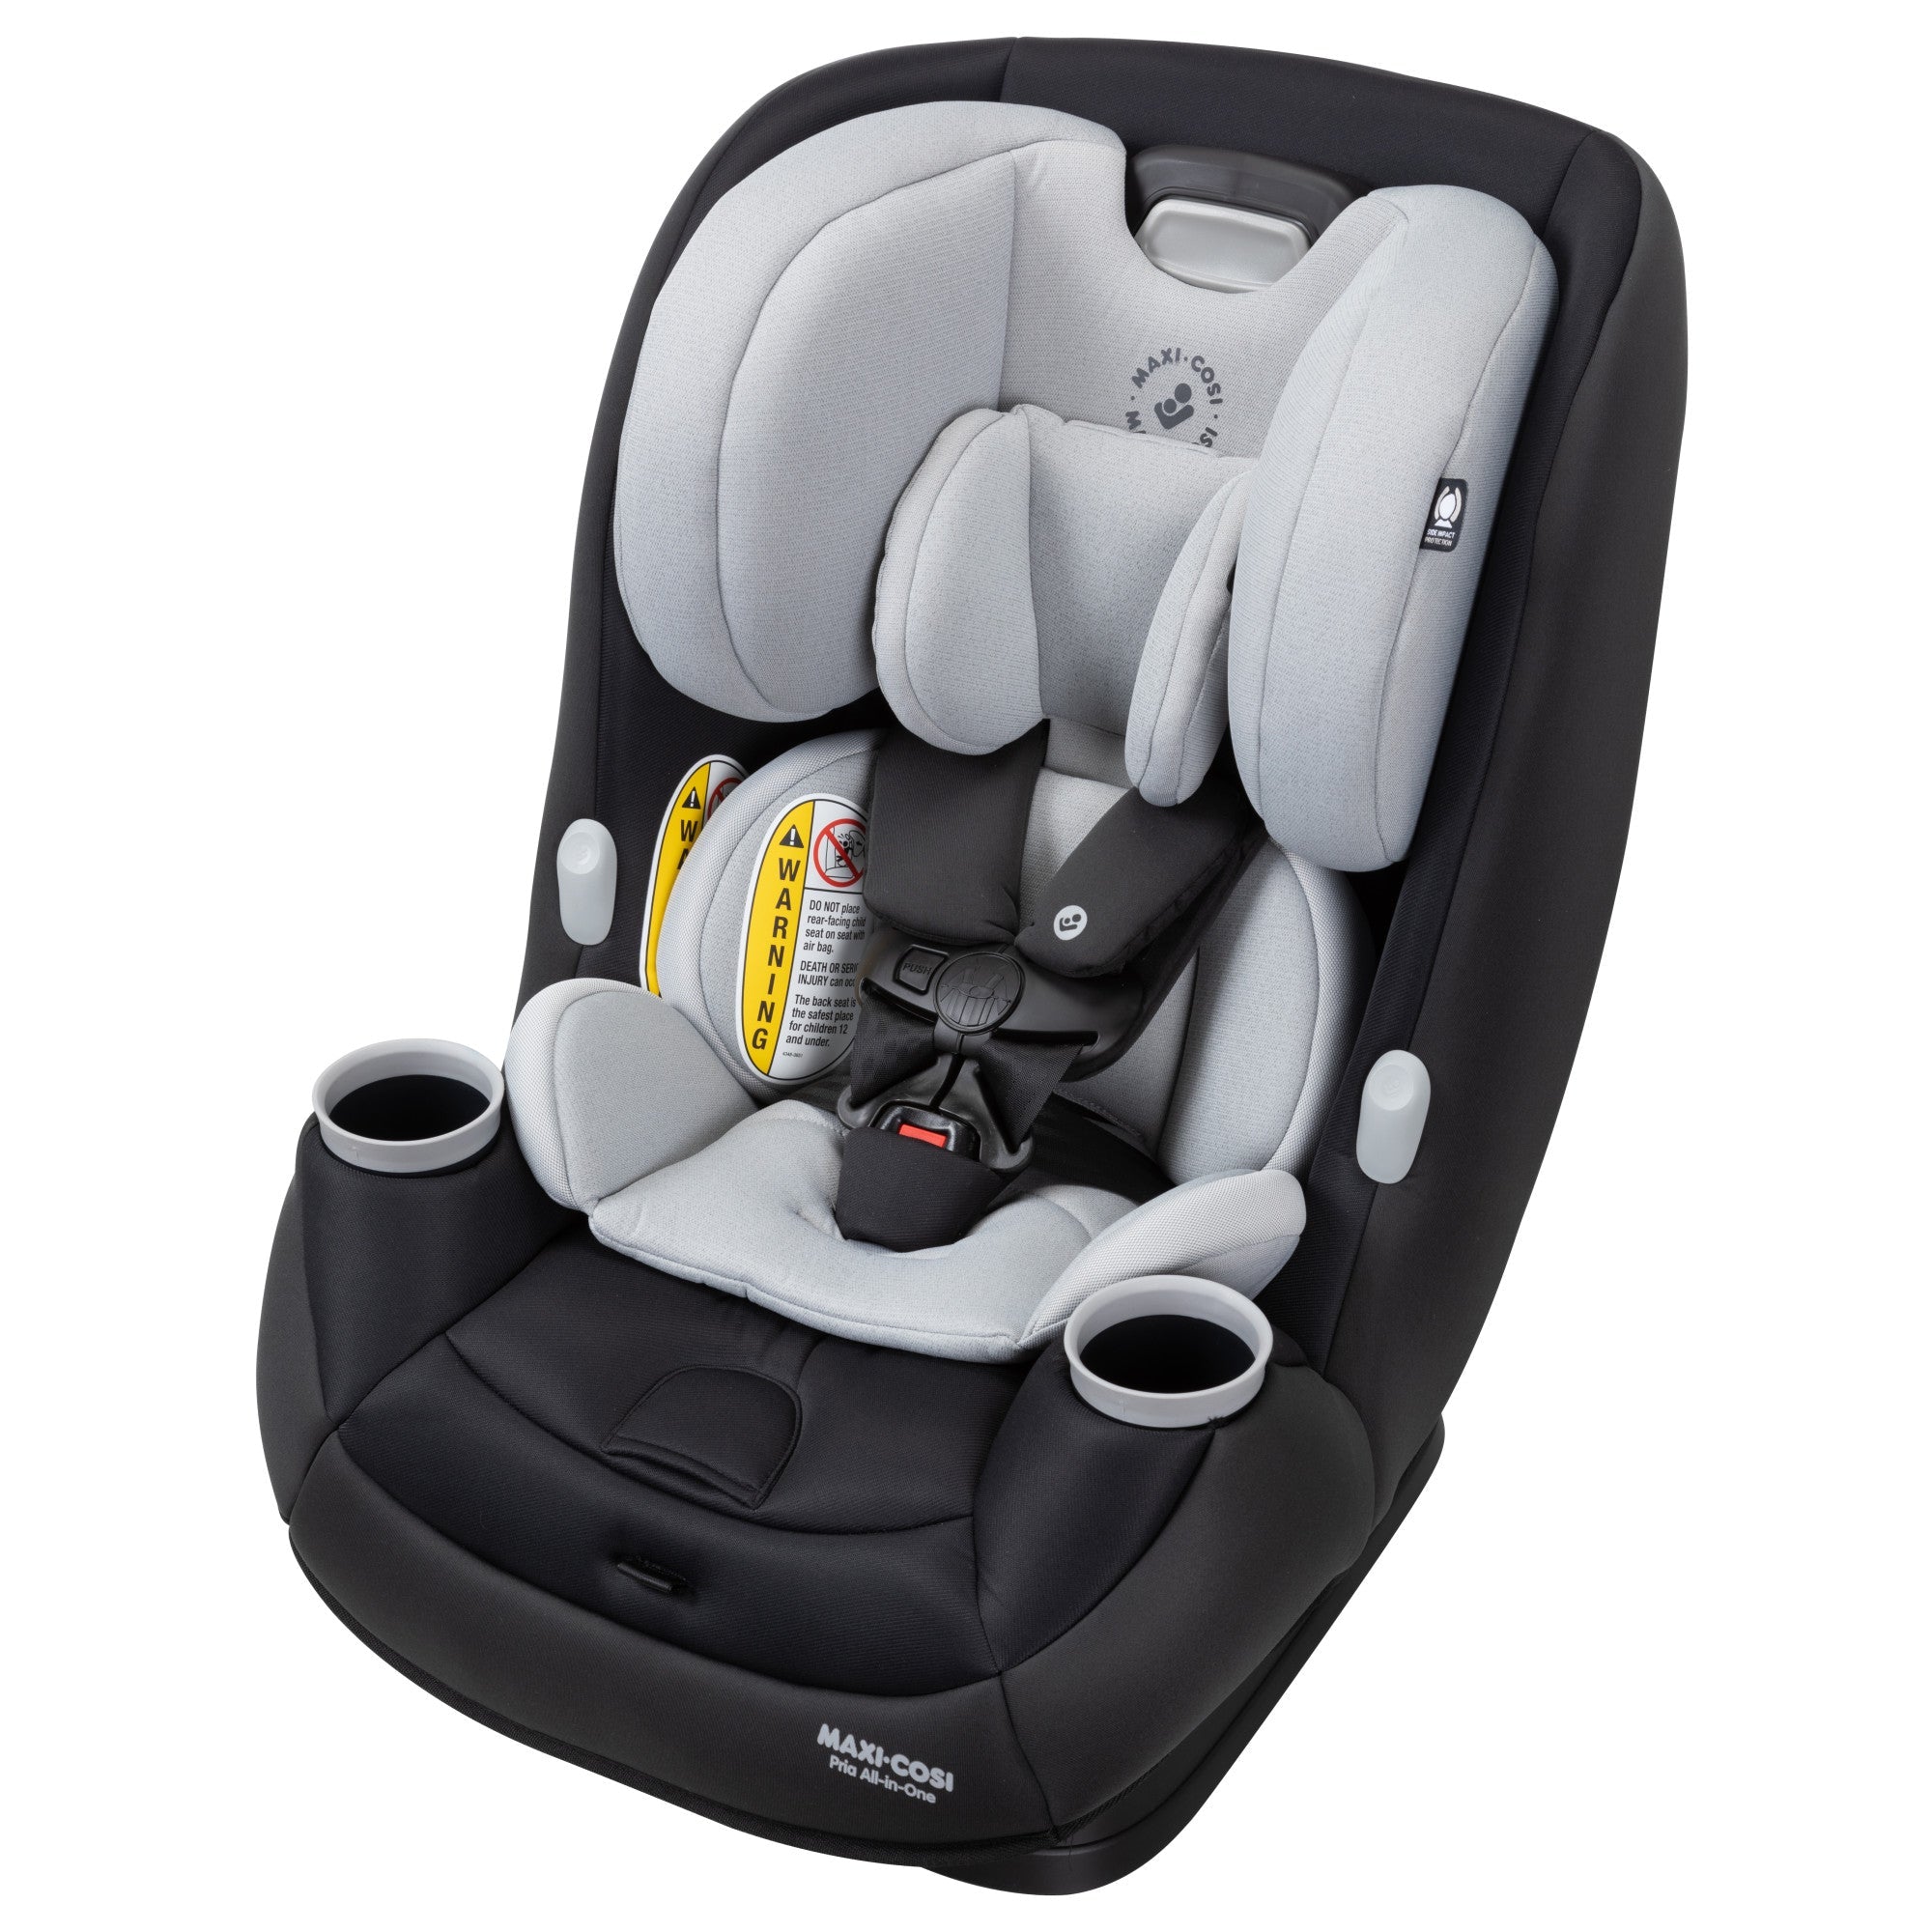 Buy after-dark Maxi-Cosi Pria All-in-One Convertible Car Seat with PureCosi